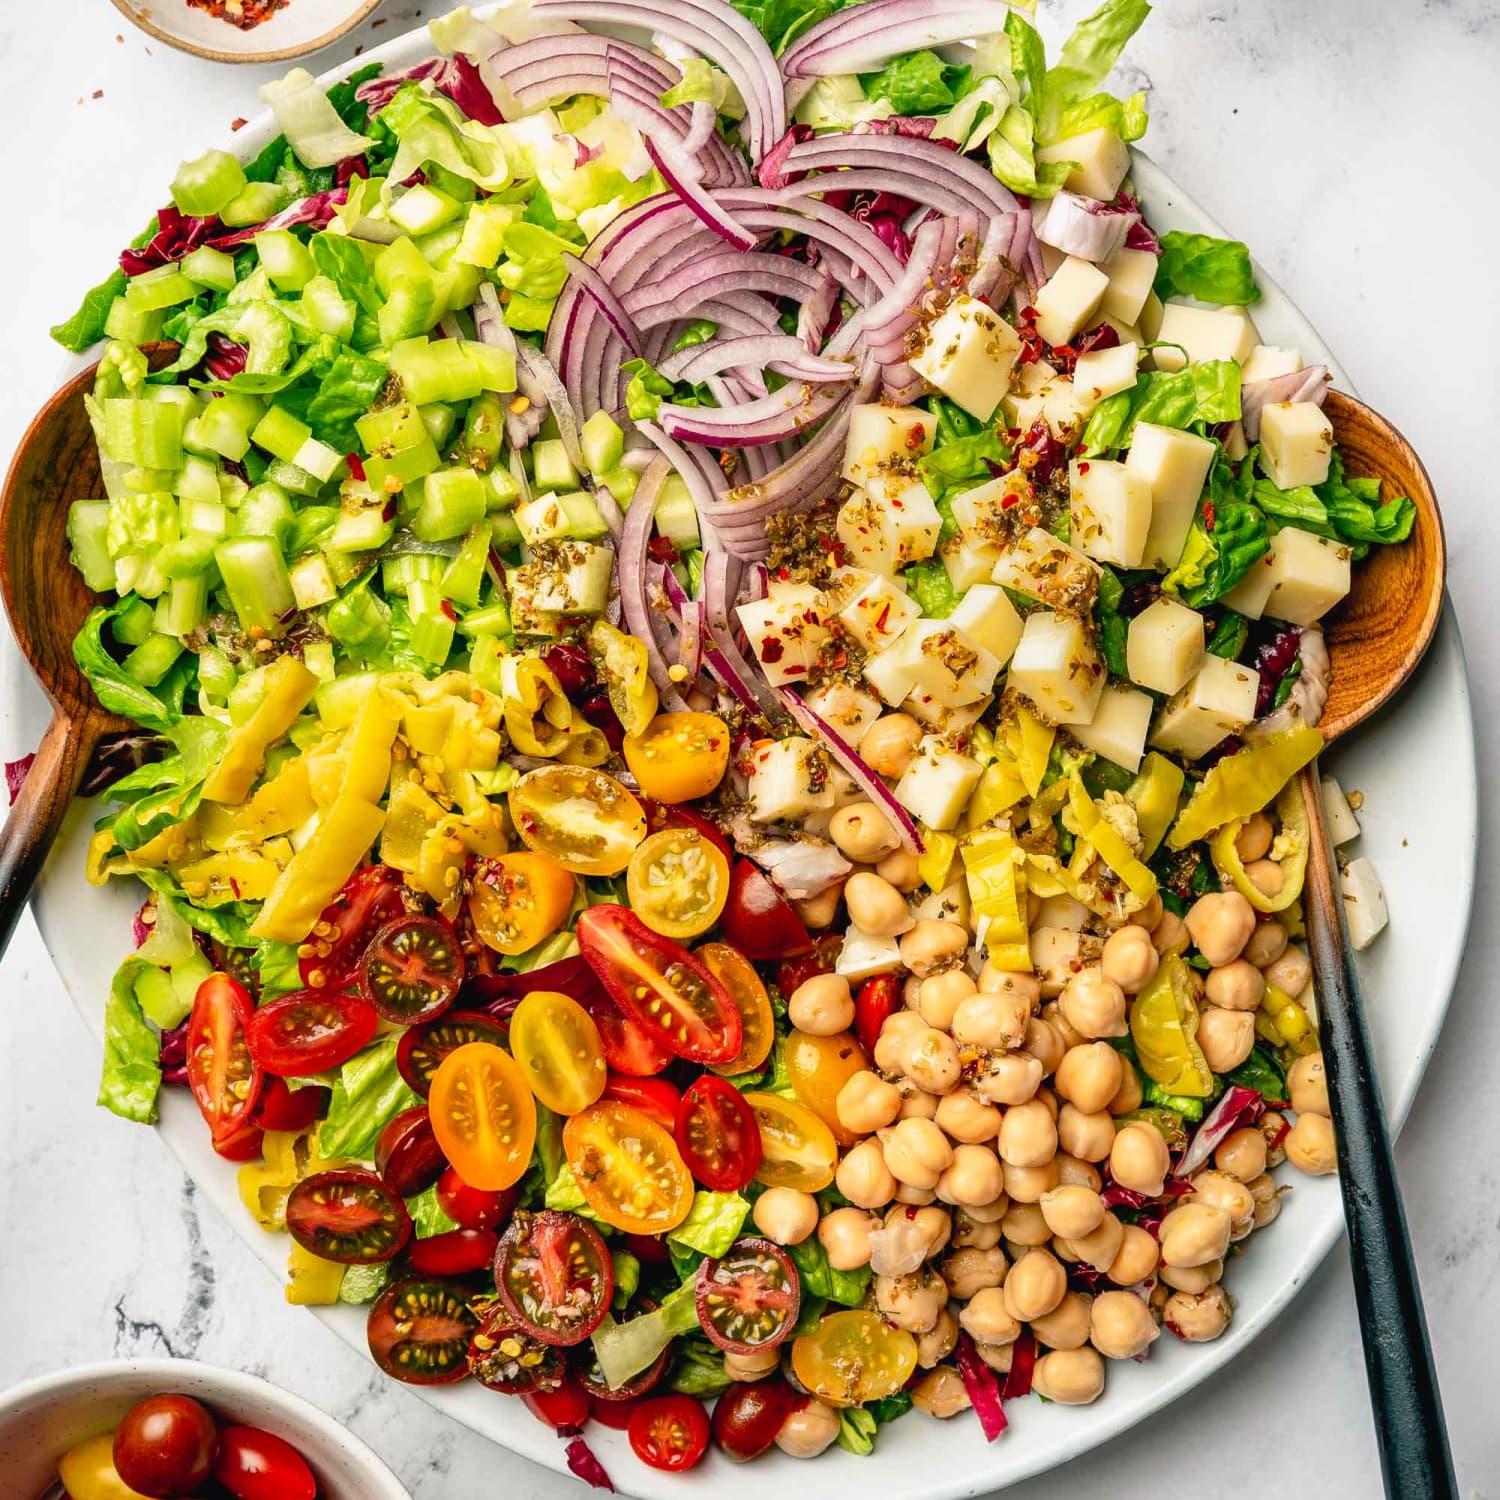 Meal Prep Salads That Will Last a Week! How to Keep Salad Fresh Longer